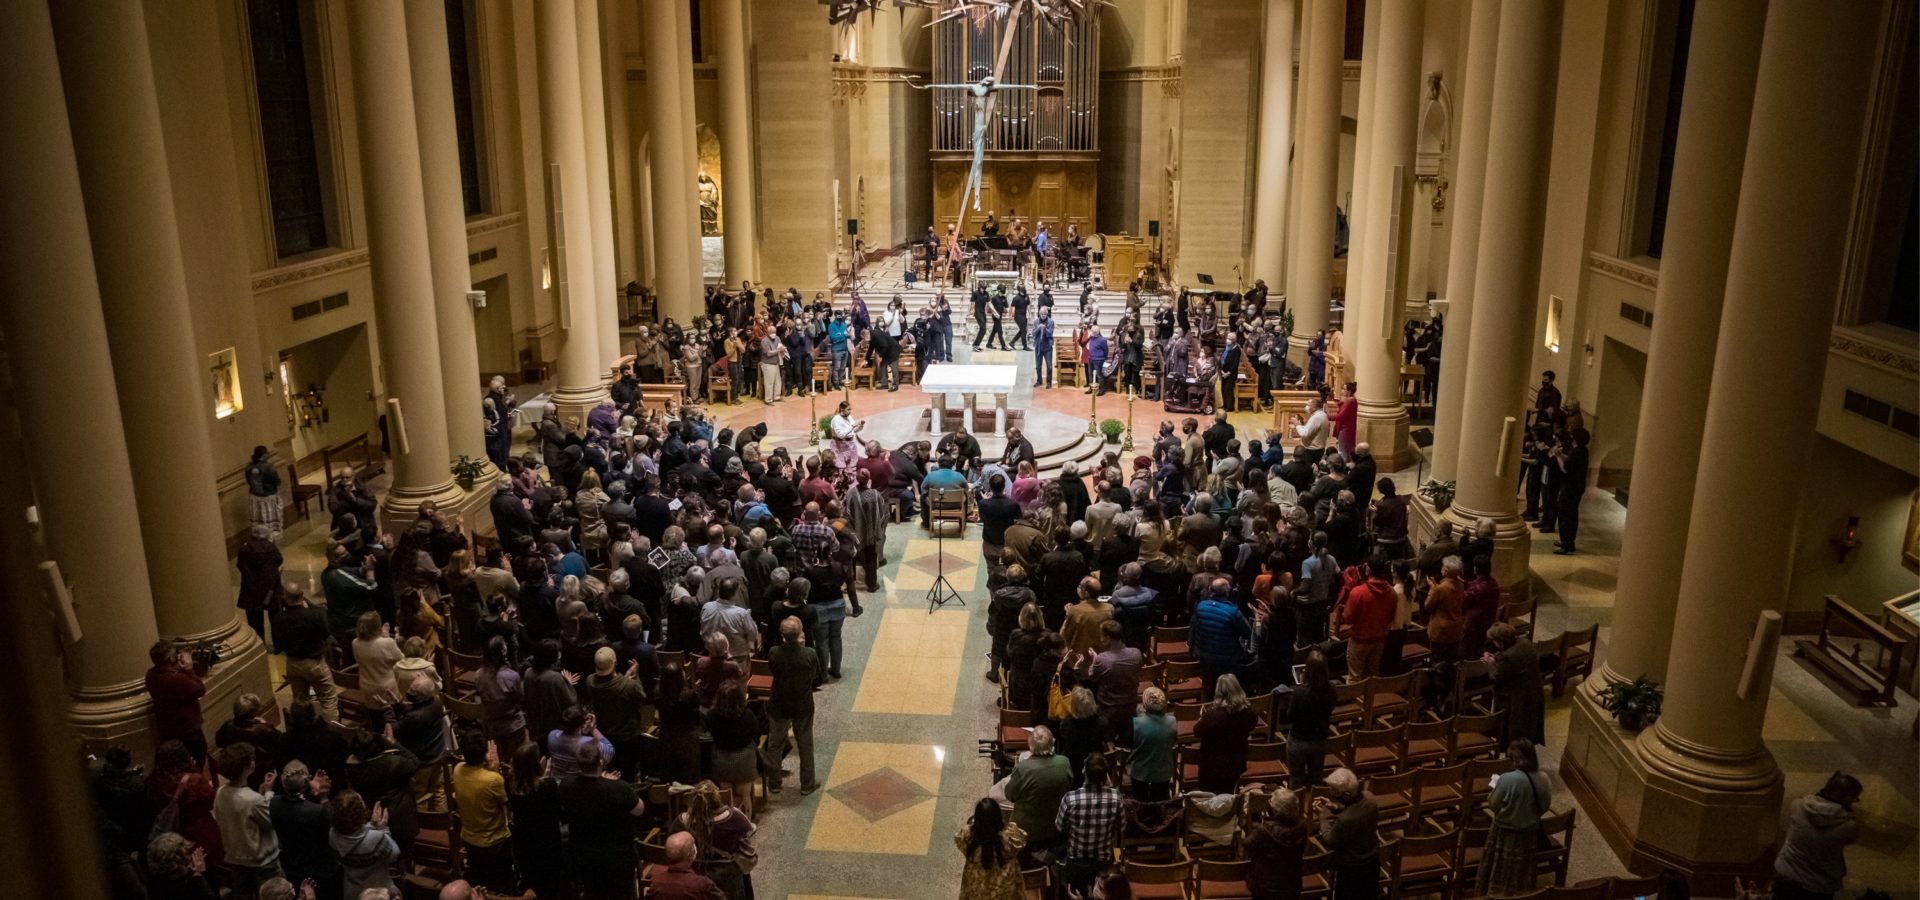 Raven Chacon's Voiceless Mass was performed at Present Music's annual Thanksgiving concert: Circle Unbroken, at the Cathedral of St. John the Evangelist in Milwaukee, WI, on November 21, 2021. Photo: Samer Ghani